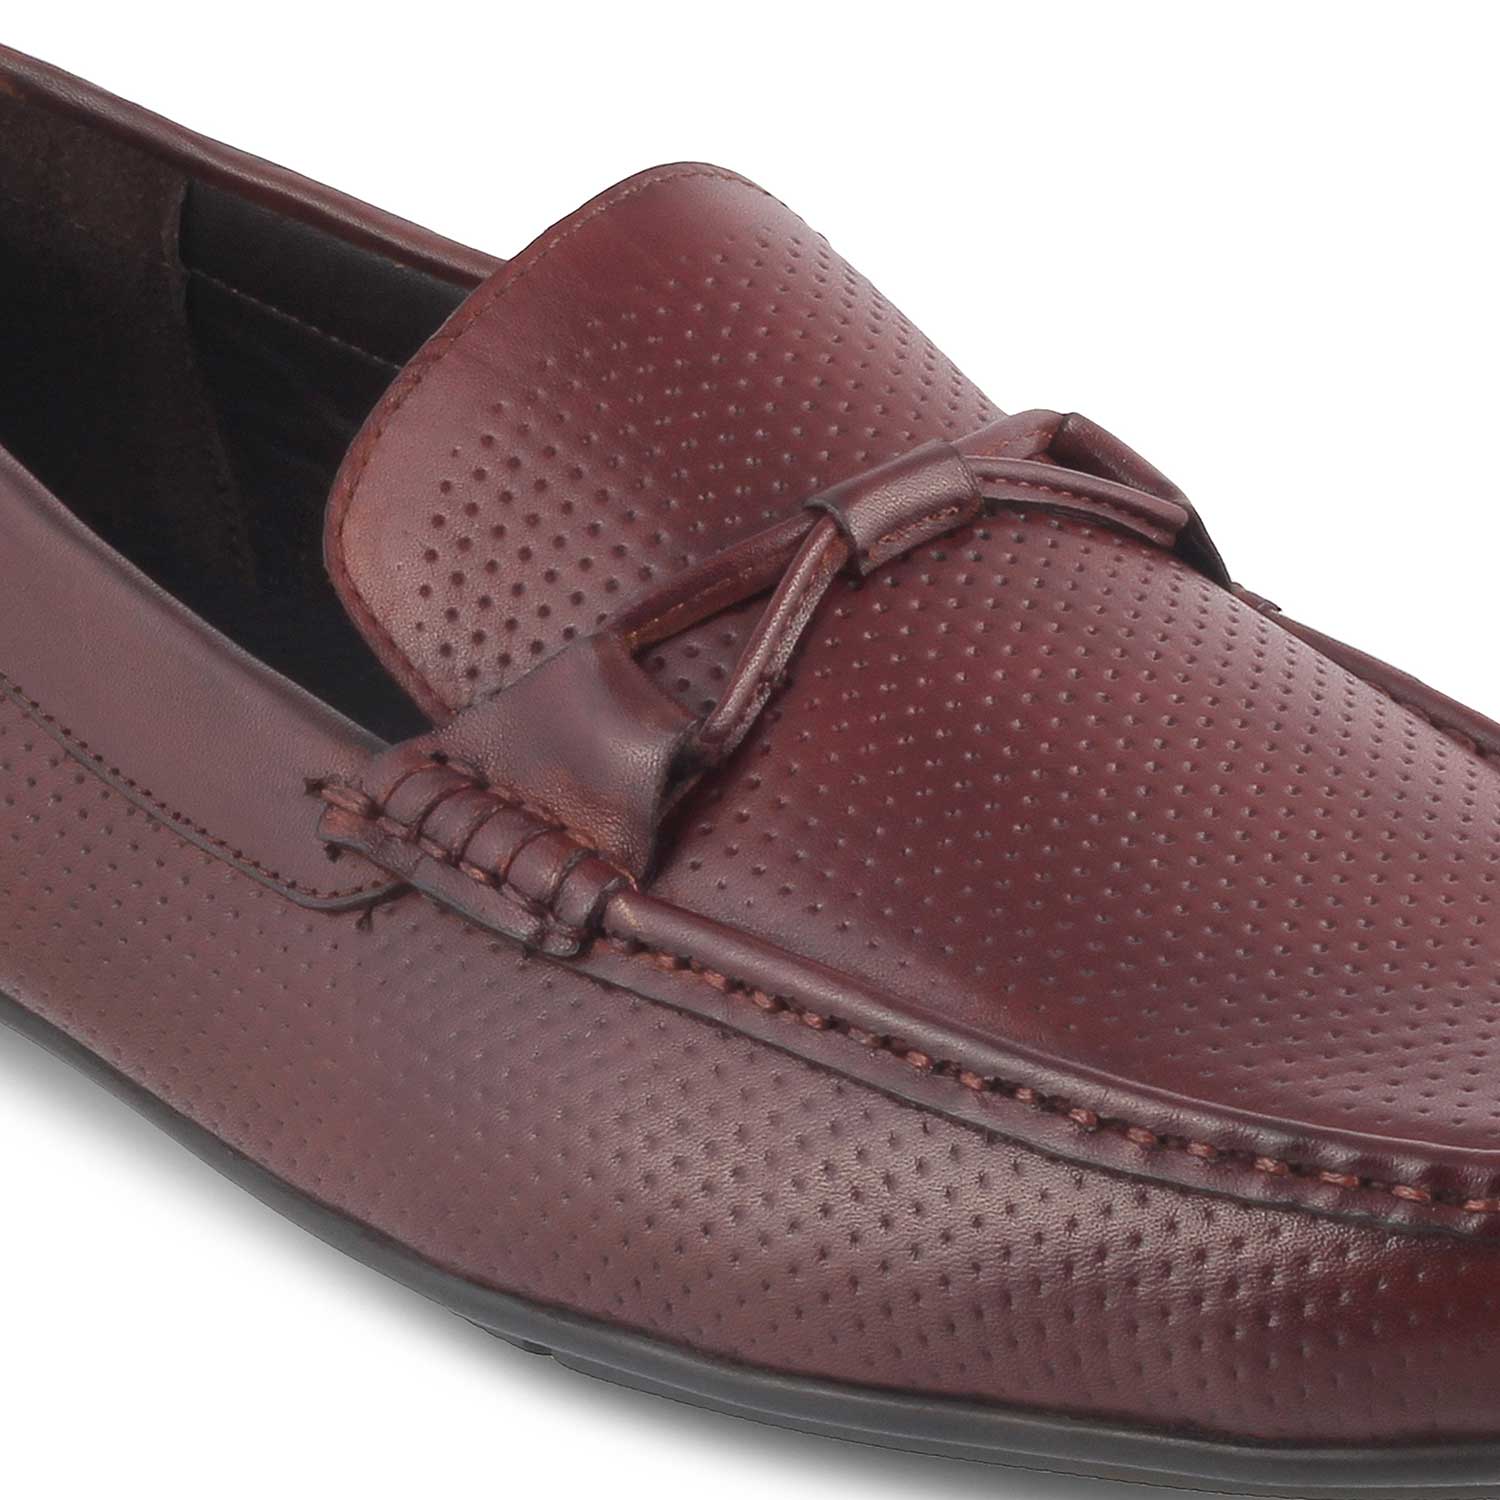 Tresmode-The Yoti Brown Men's Leather Driving Loafers Tresmode-Tresmode